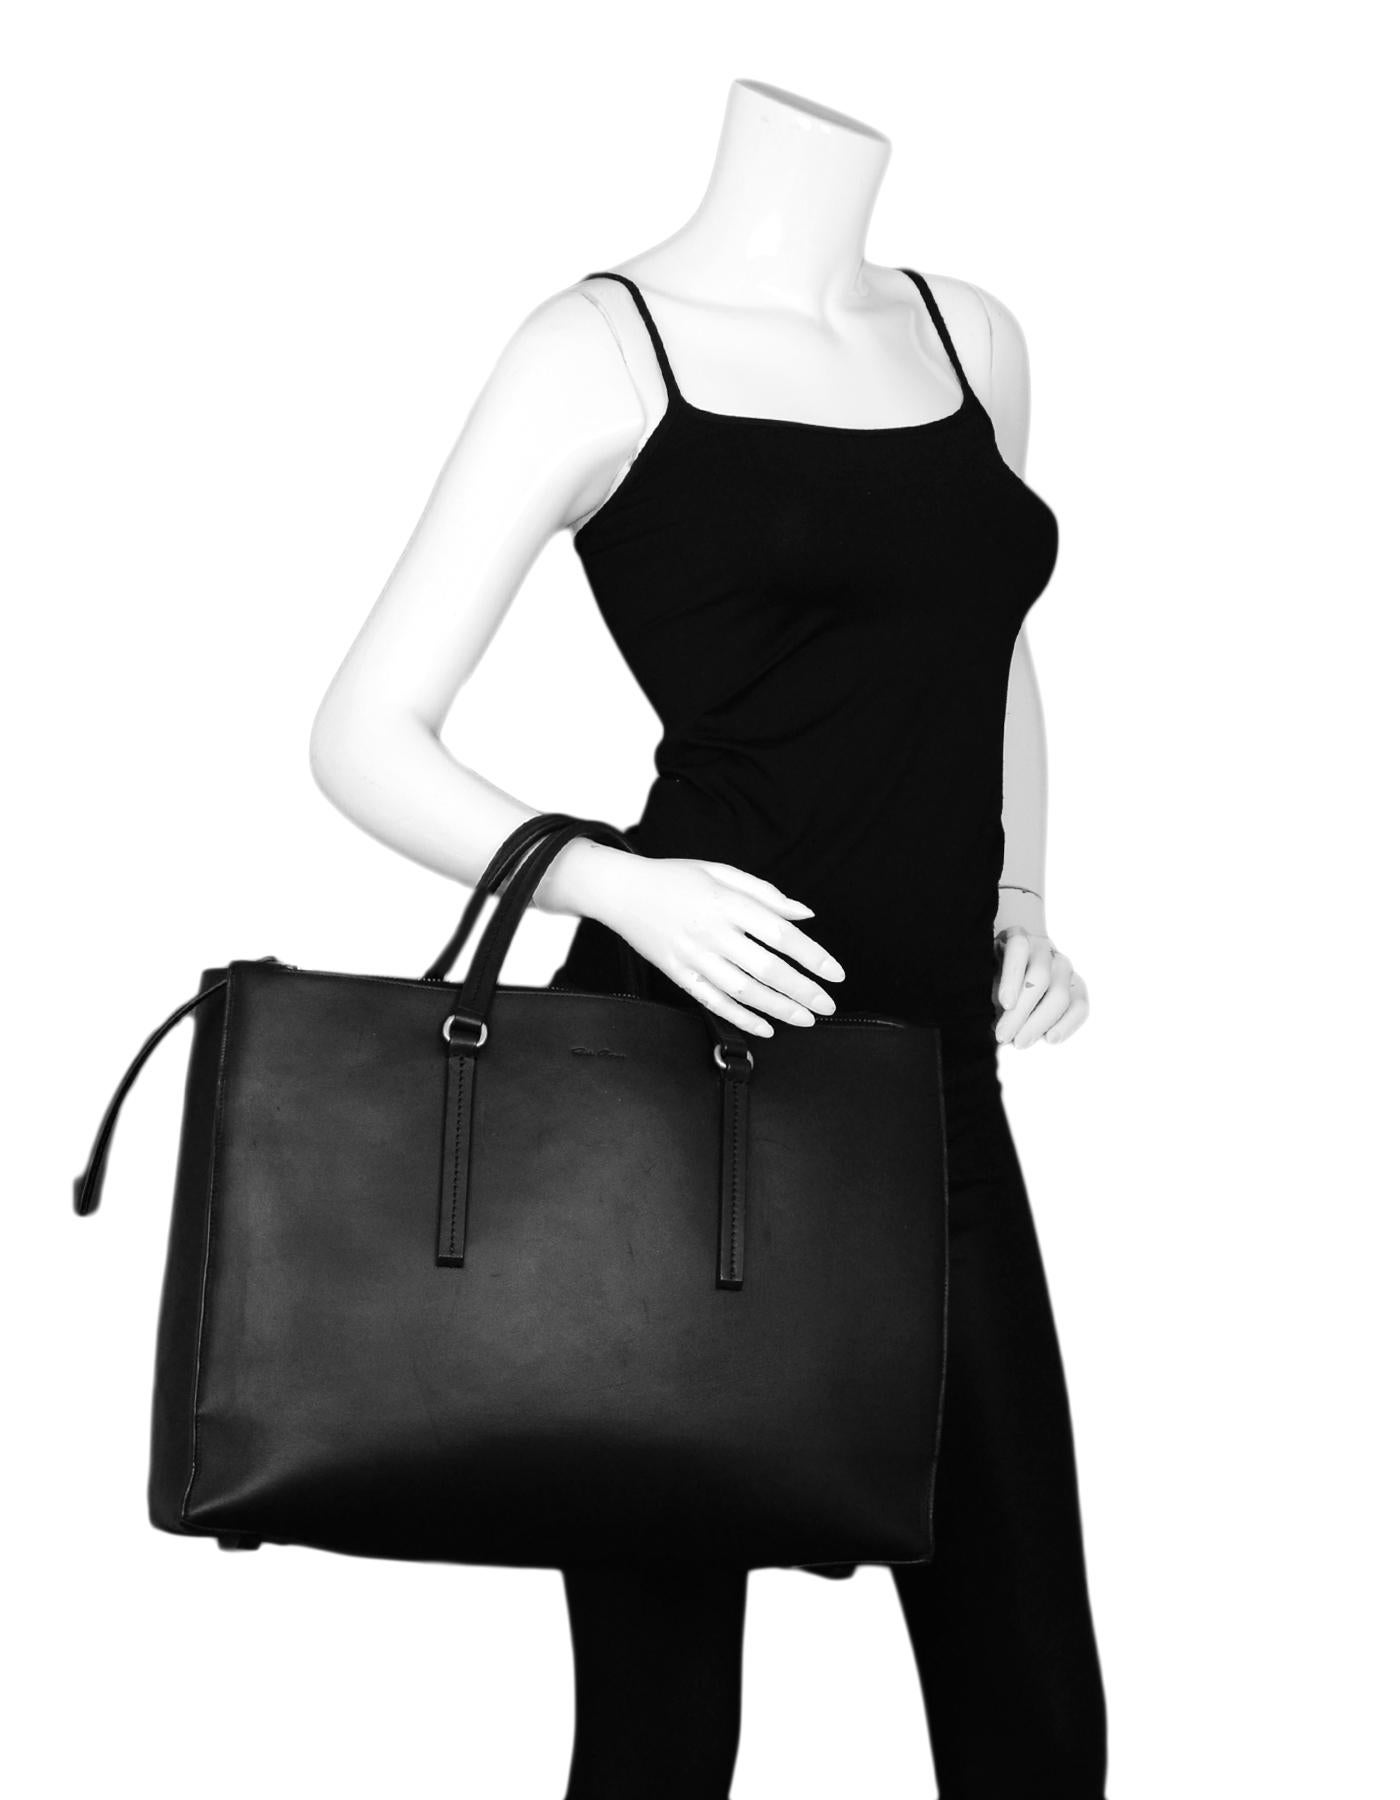 Rick Owens Black Leather Open Tote Bag w/ zipper 

Color: Black
Hardware: Silvertone hardware
Materials: Leather
Lining: Grey suede lining 
Closure/Opening: Open top
Exterior Pockets: N/A
Interior Pockets: Two compartments, five slit